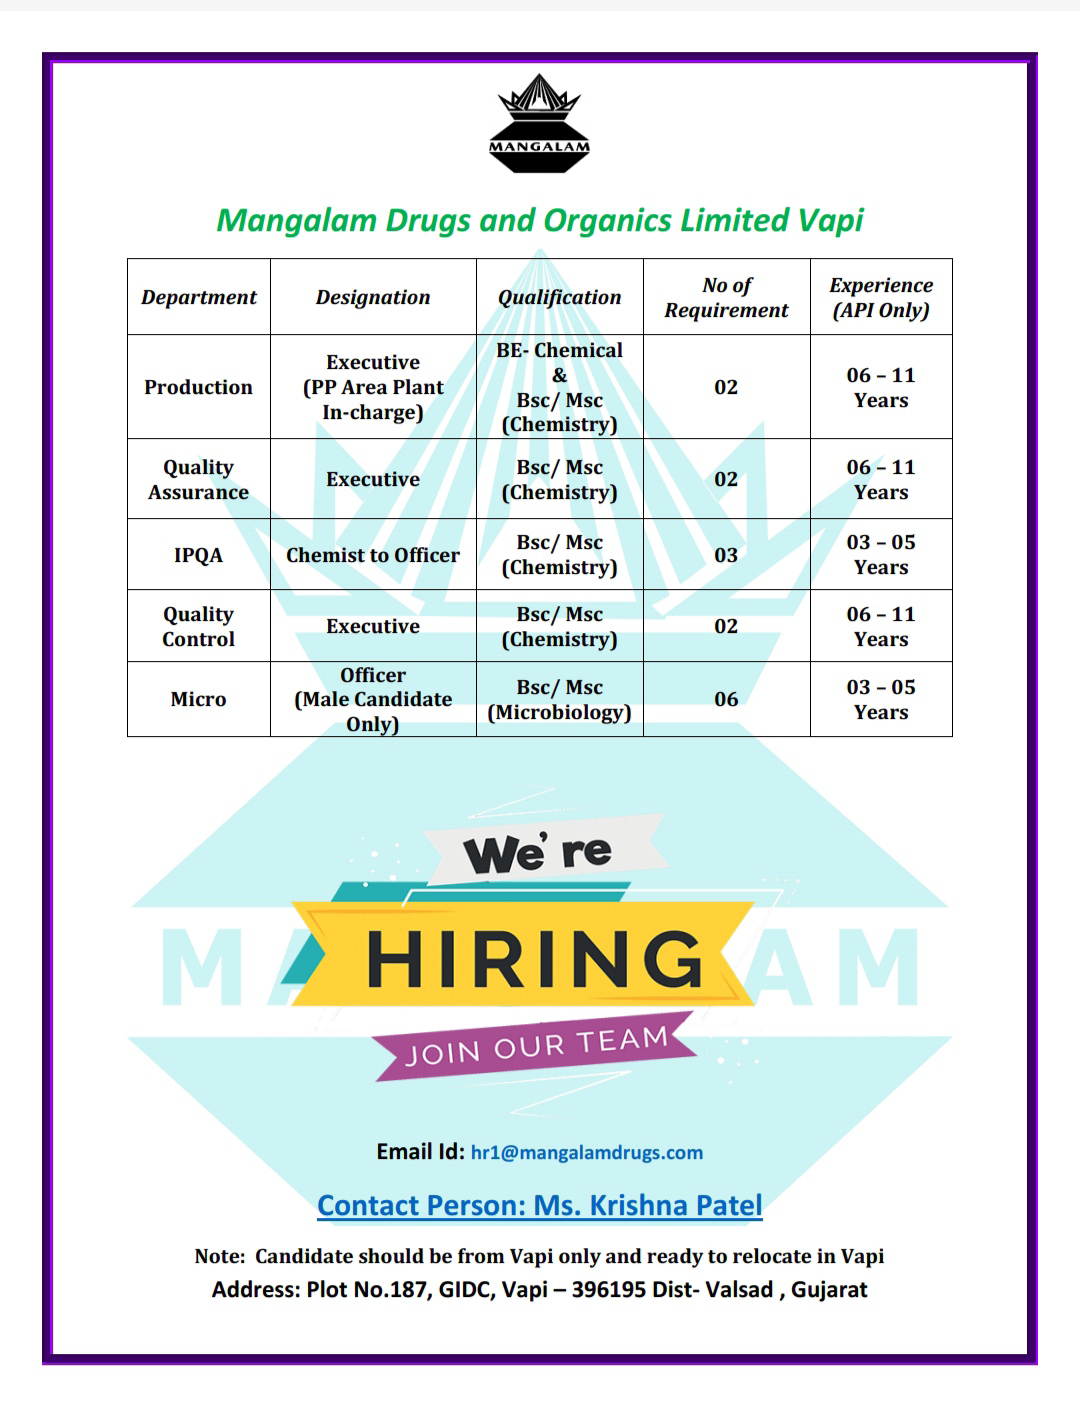 Job Available's for Mangalam Drugs and Organics Ltd Job Vacancy for Production/ QA/ IPQA/ QC/ Microbiology Department